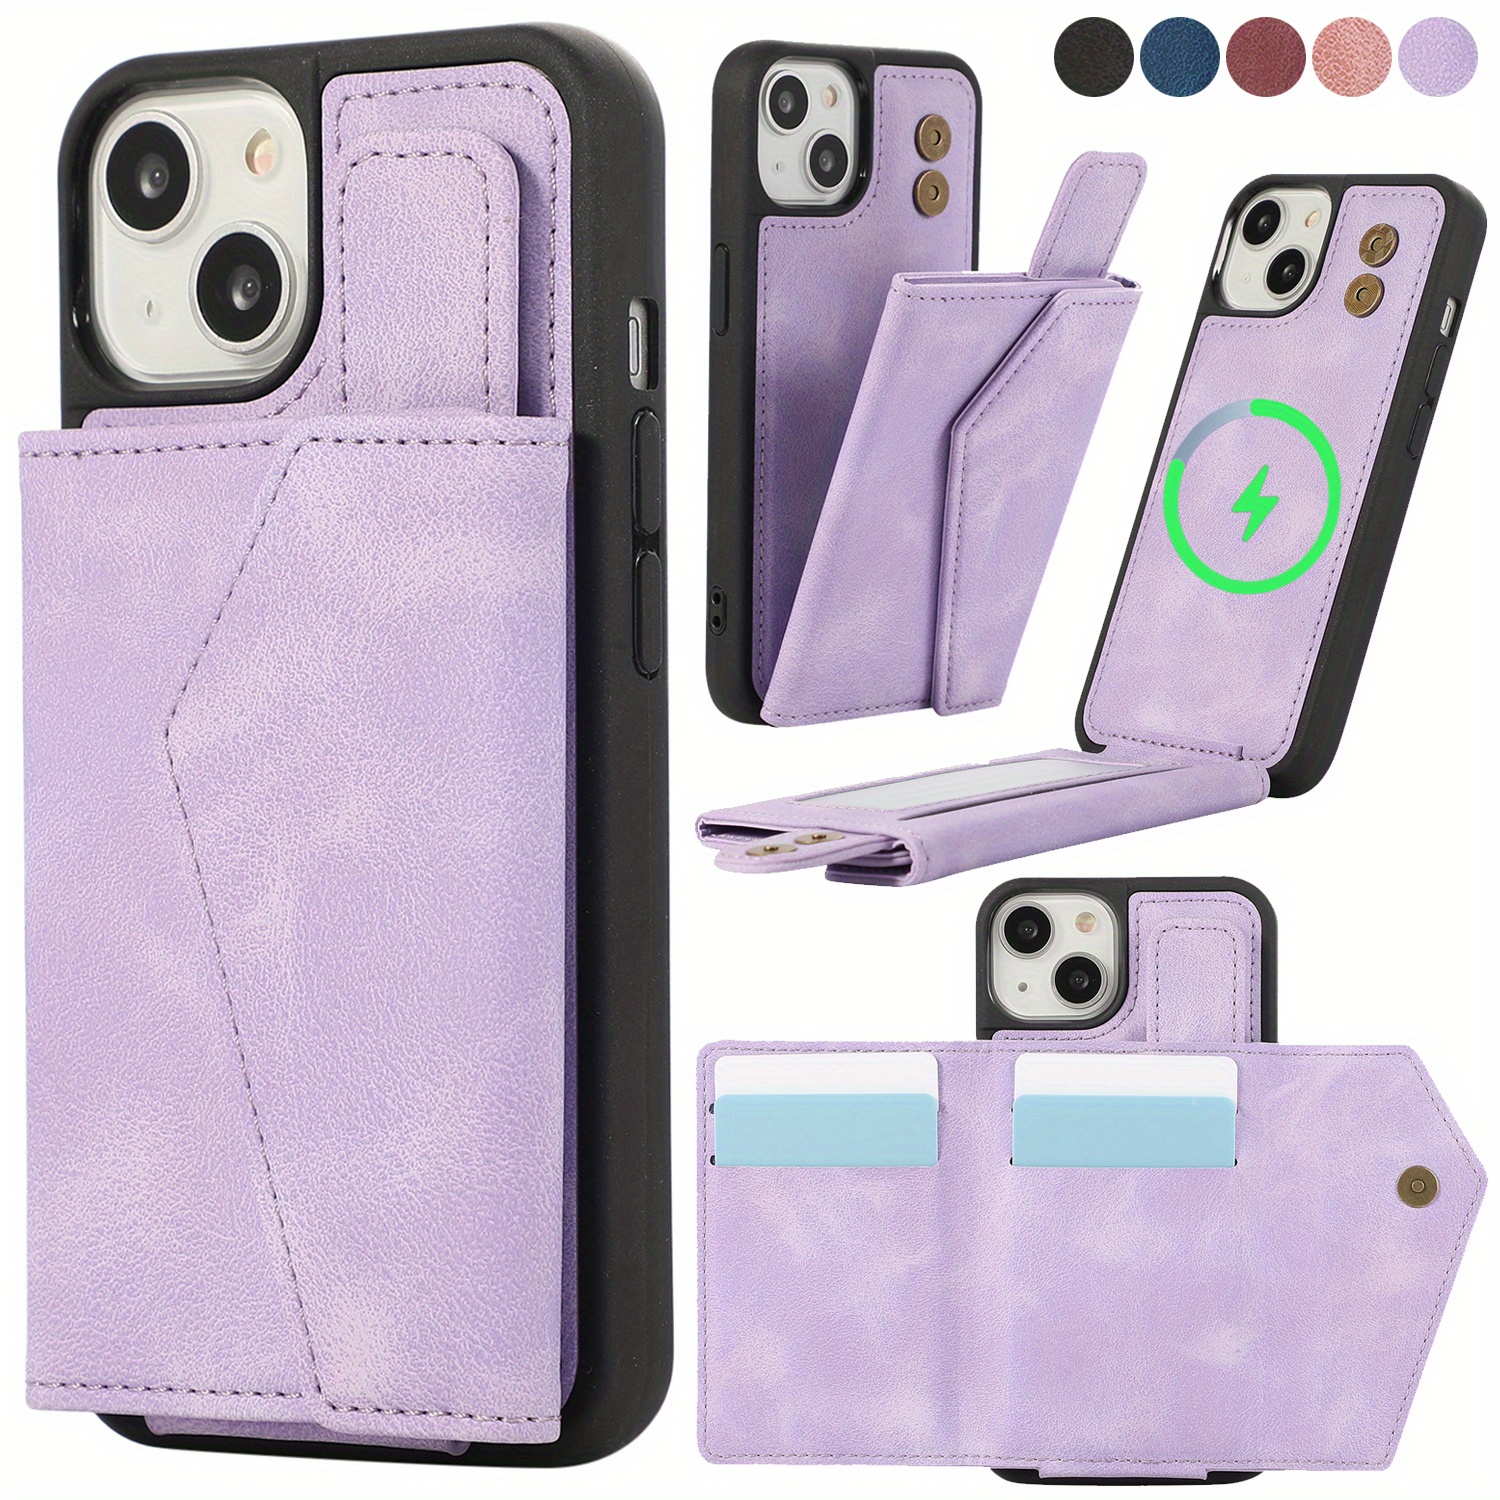 Luxury Suede Alcantara Case for AirPods Pro 2 Pro 1 Faux Leather Cases –